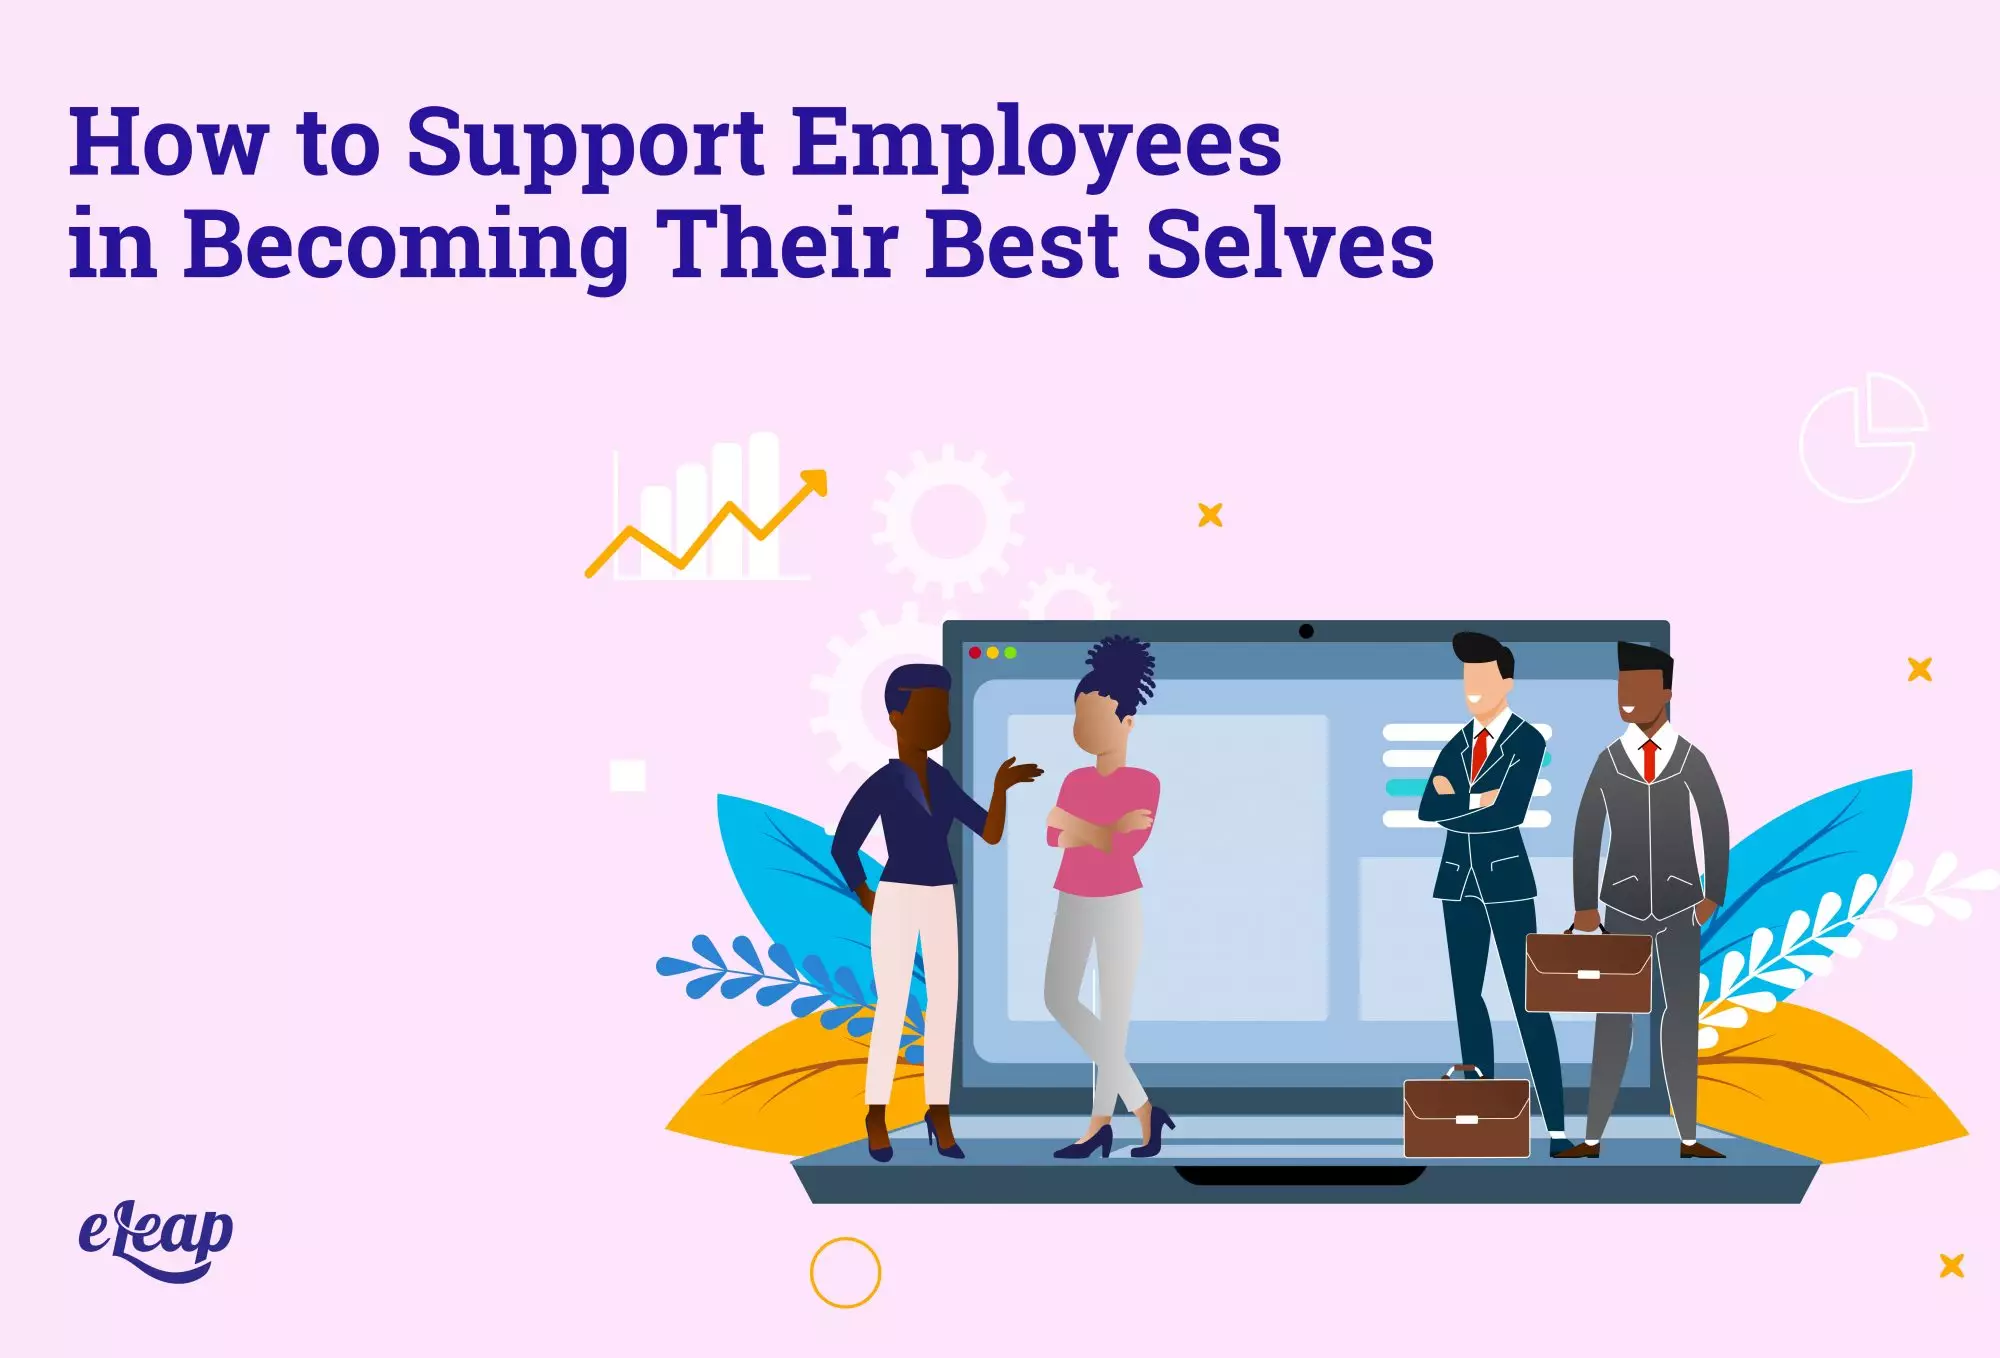 How to Support Employees in Becoming Their Best Selves